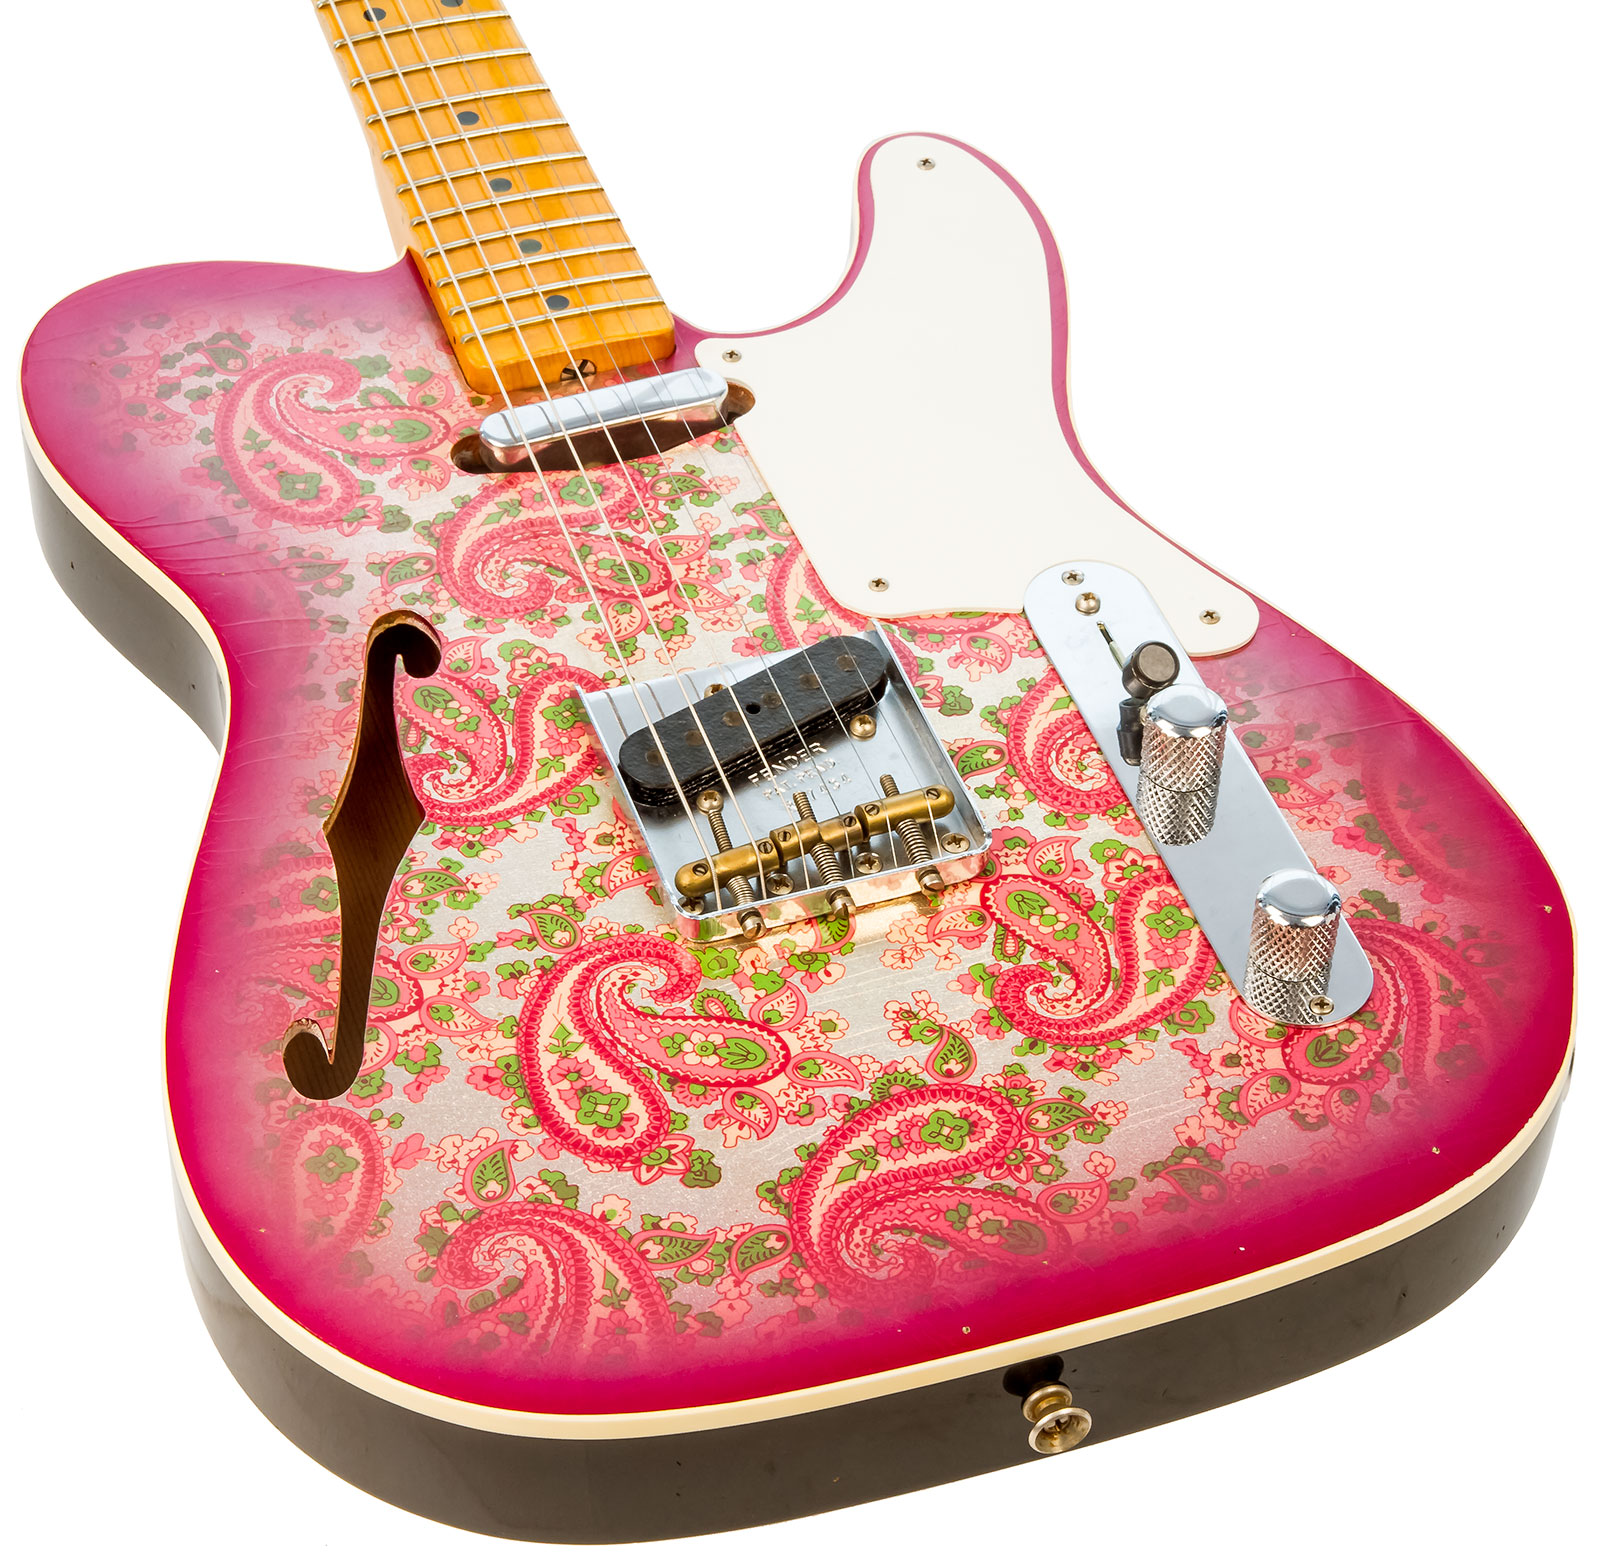 Fender Custom Shop Double Esquire/tele Custom 2s Ht Mn #r97434 - Journeyman Relic Aged Pink Paisley - Semi-hollow electric guitar - Variation 2